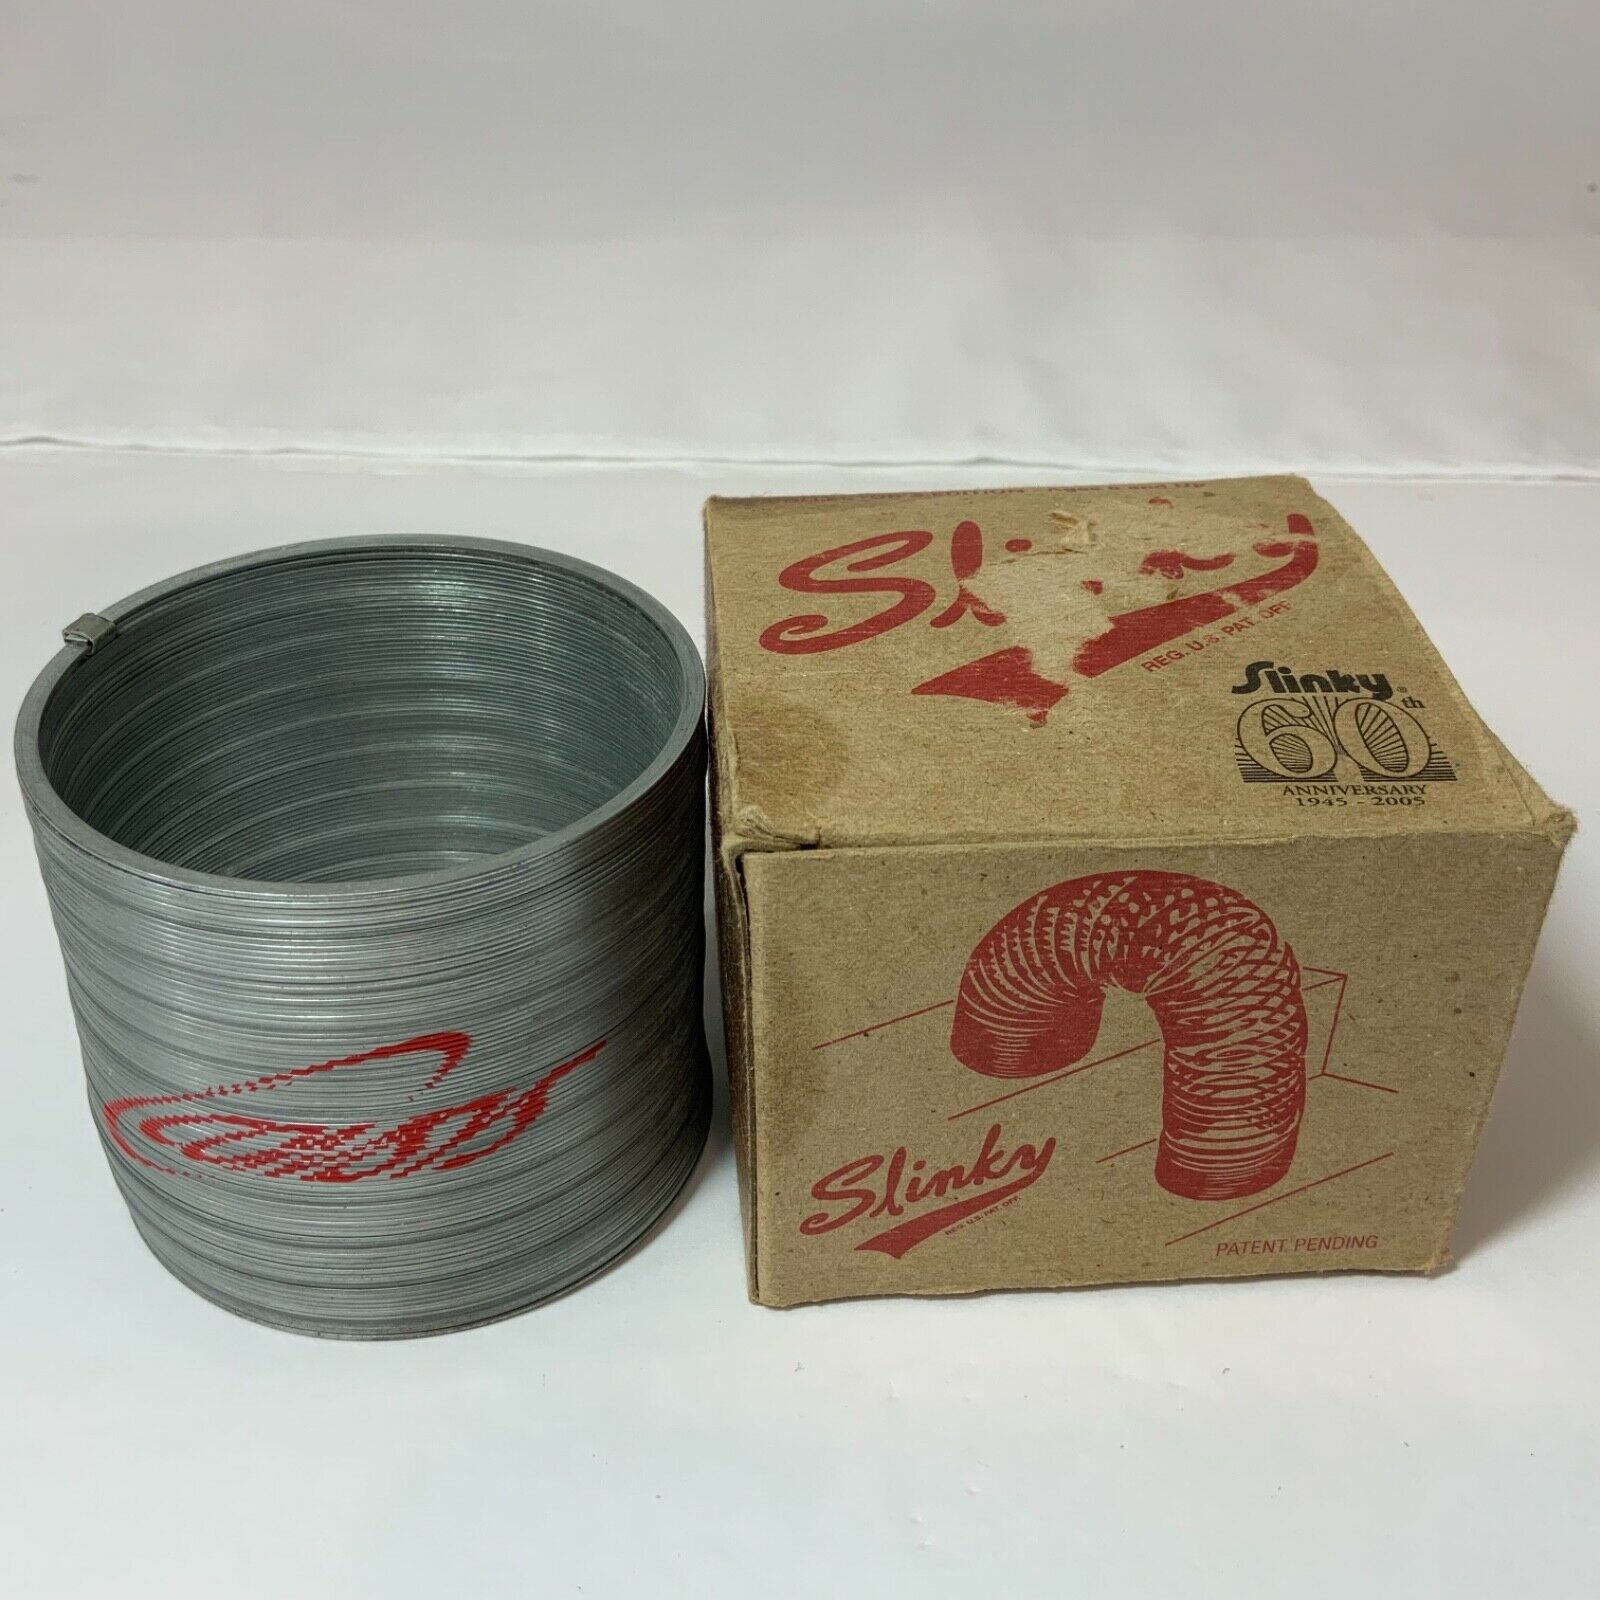 Slinky Collectors Edition  60th Anniversary Vintage 2006 Toy